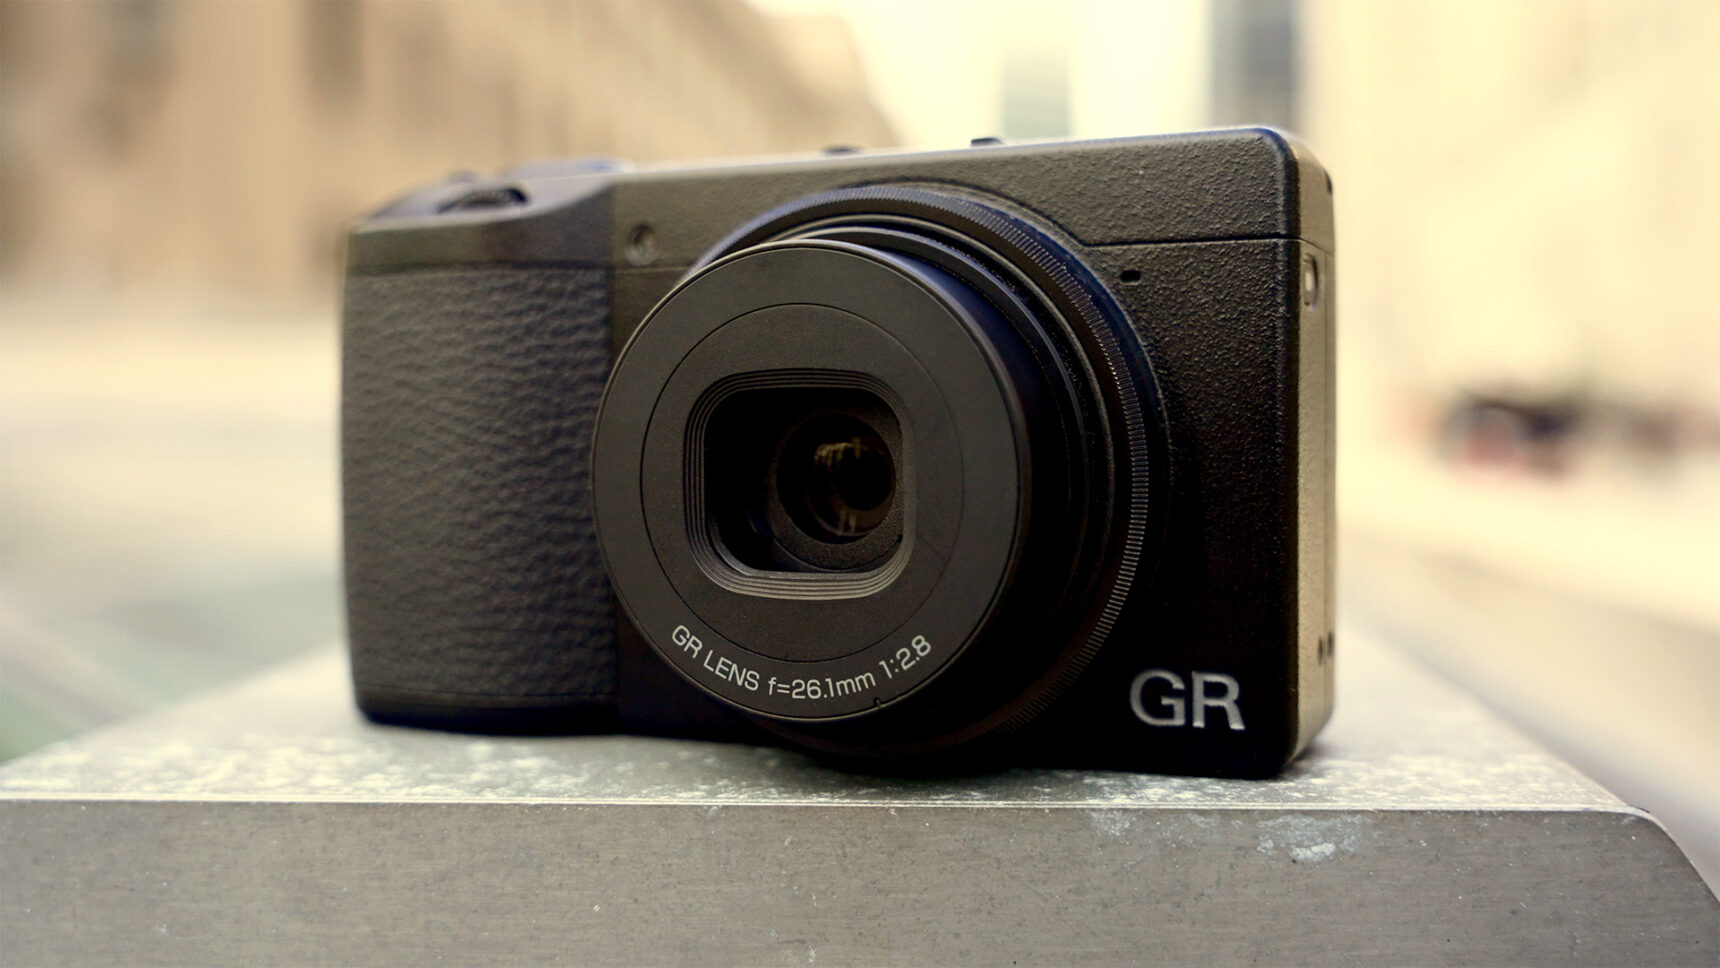 Two weeks with Ricoh GR3x GRIIIx A Great camera for Street Photography at  40mm lenses?, by LI Sam, Rokkorxblog